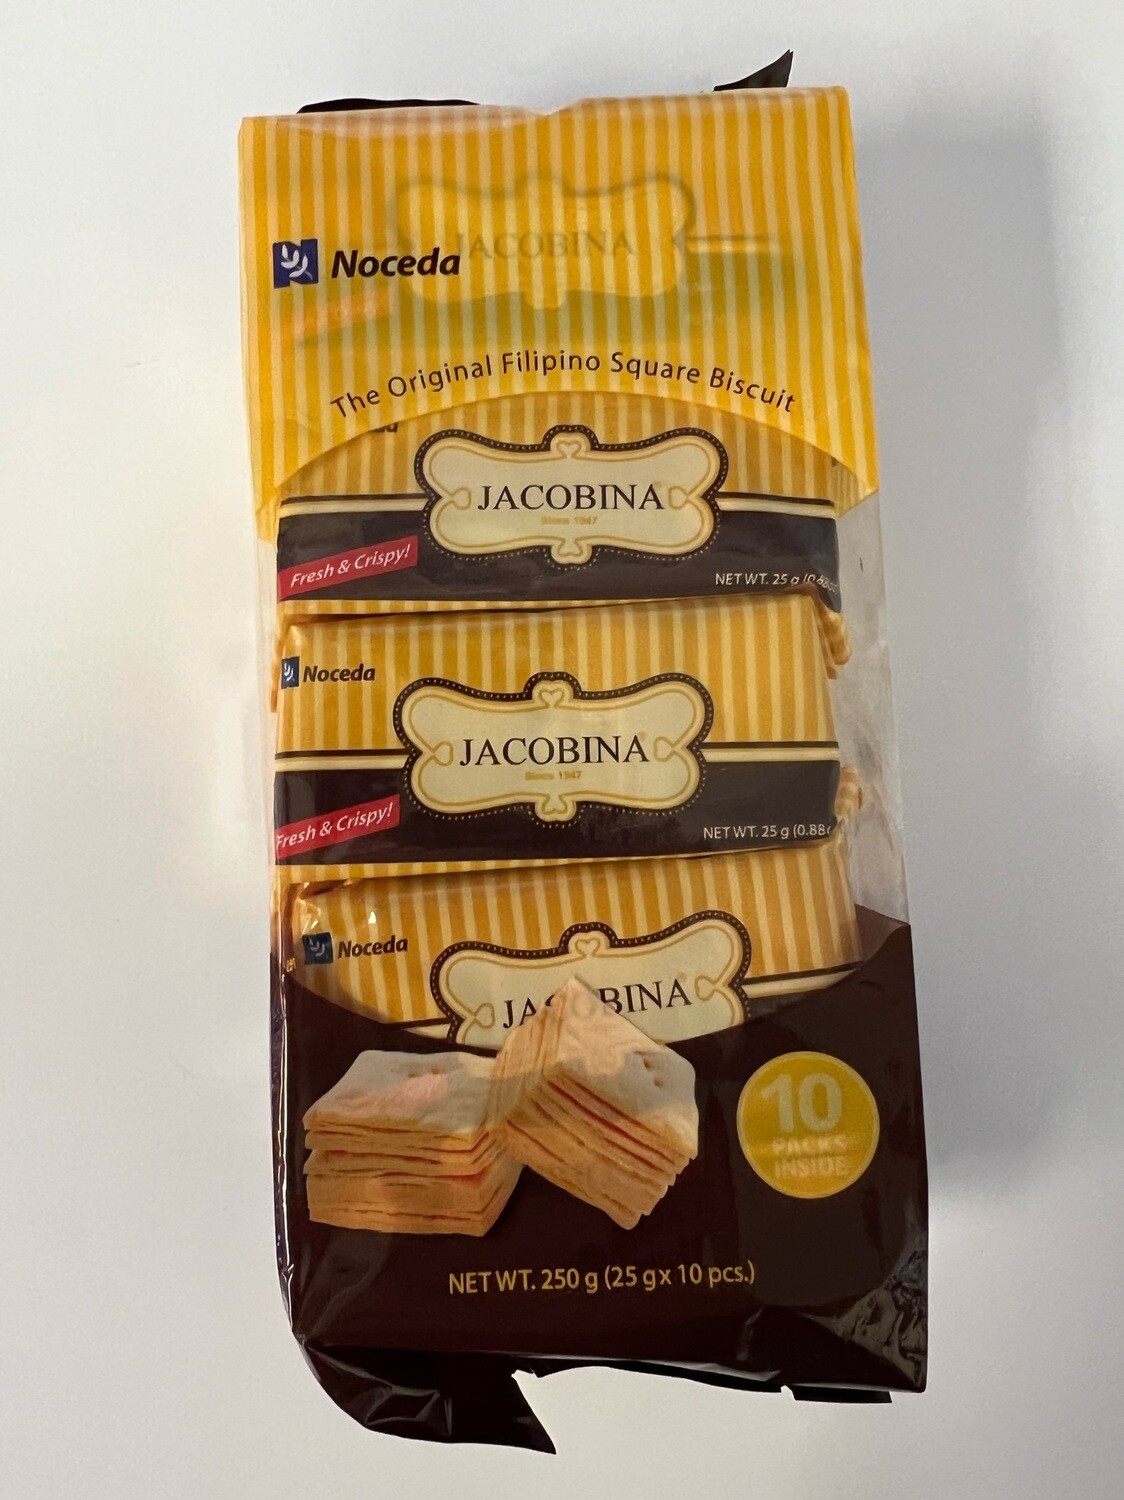 Noceda Jacobina square biscuits package